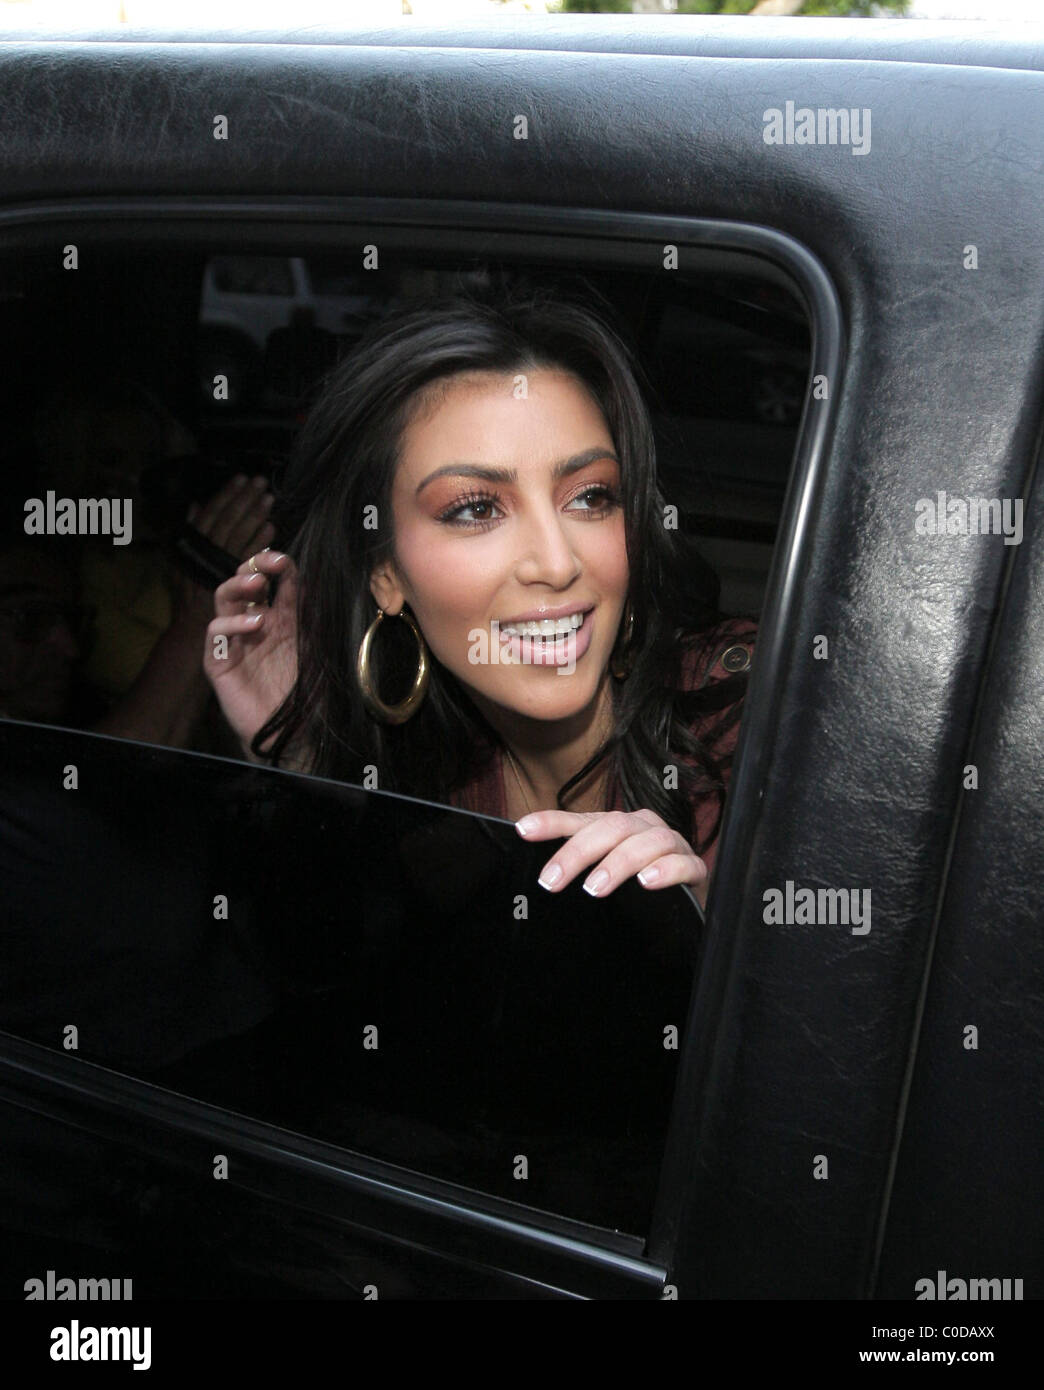 Reality Tv Star Kim Kardashian Filming Scenes For Her Show Keeping Up